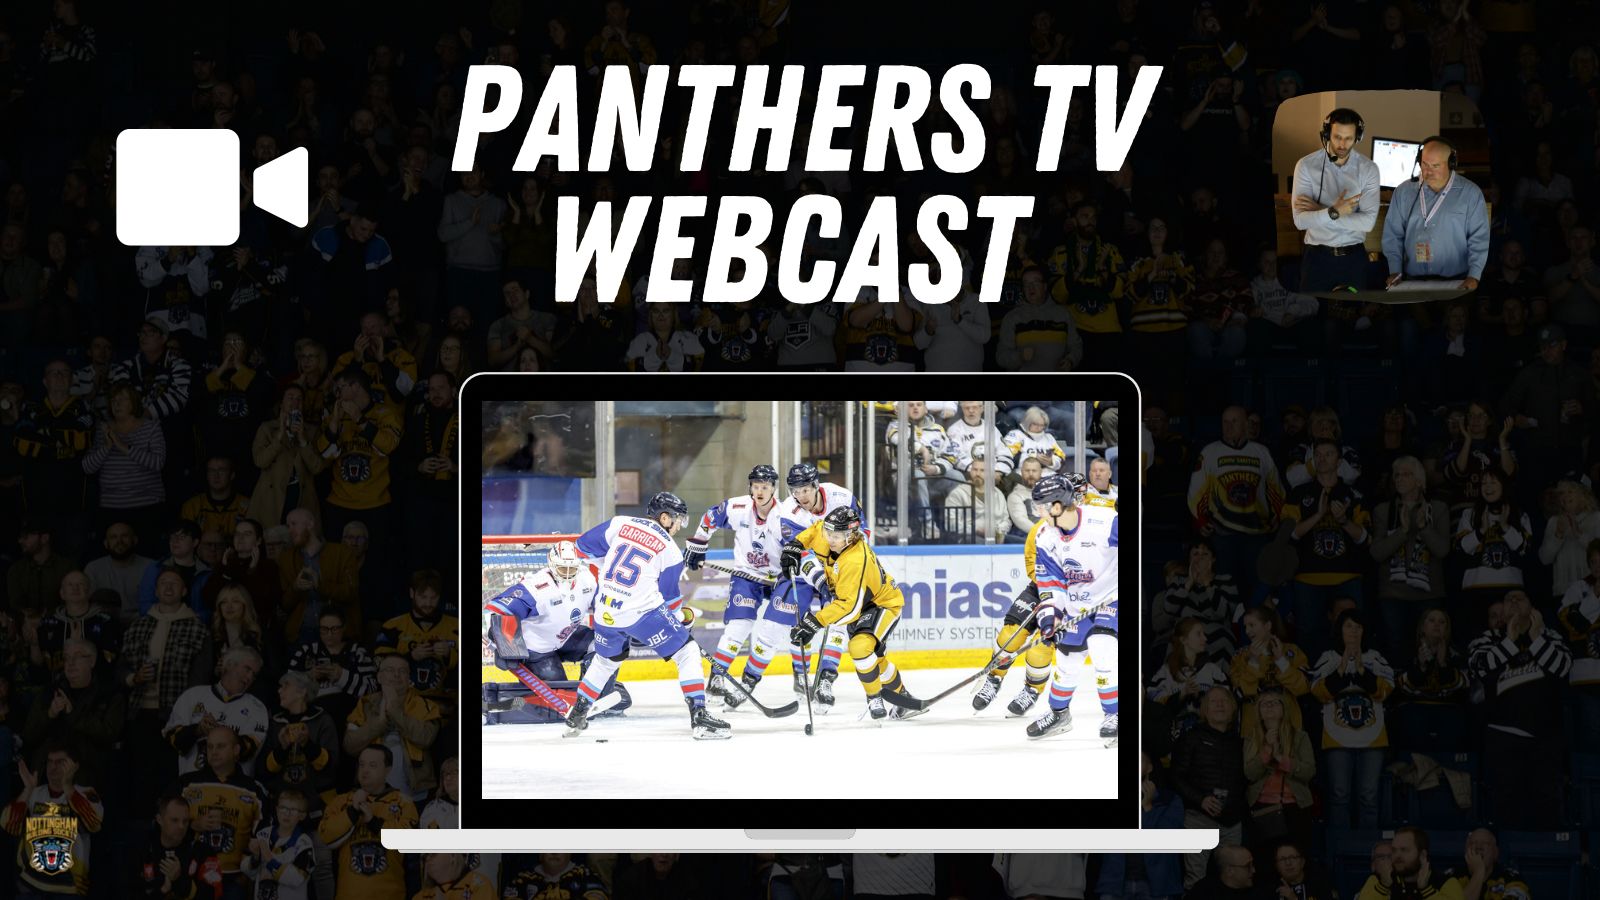 PANTHERS V STARS LIVE ON PANTHERS TV TONIGHT Top Image